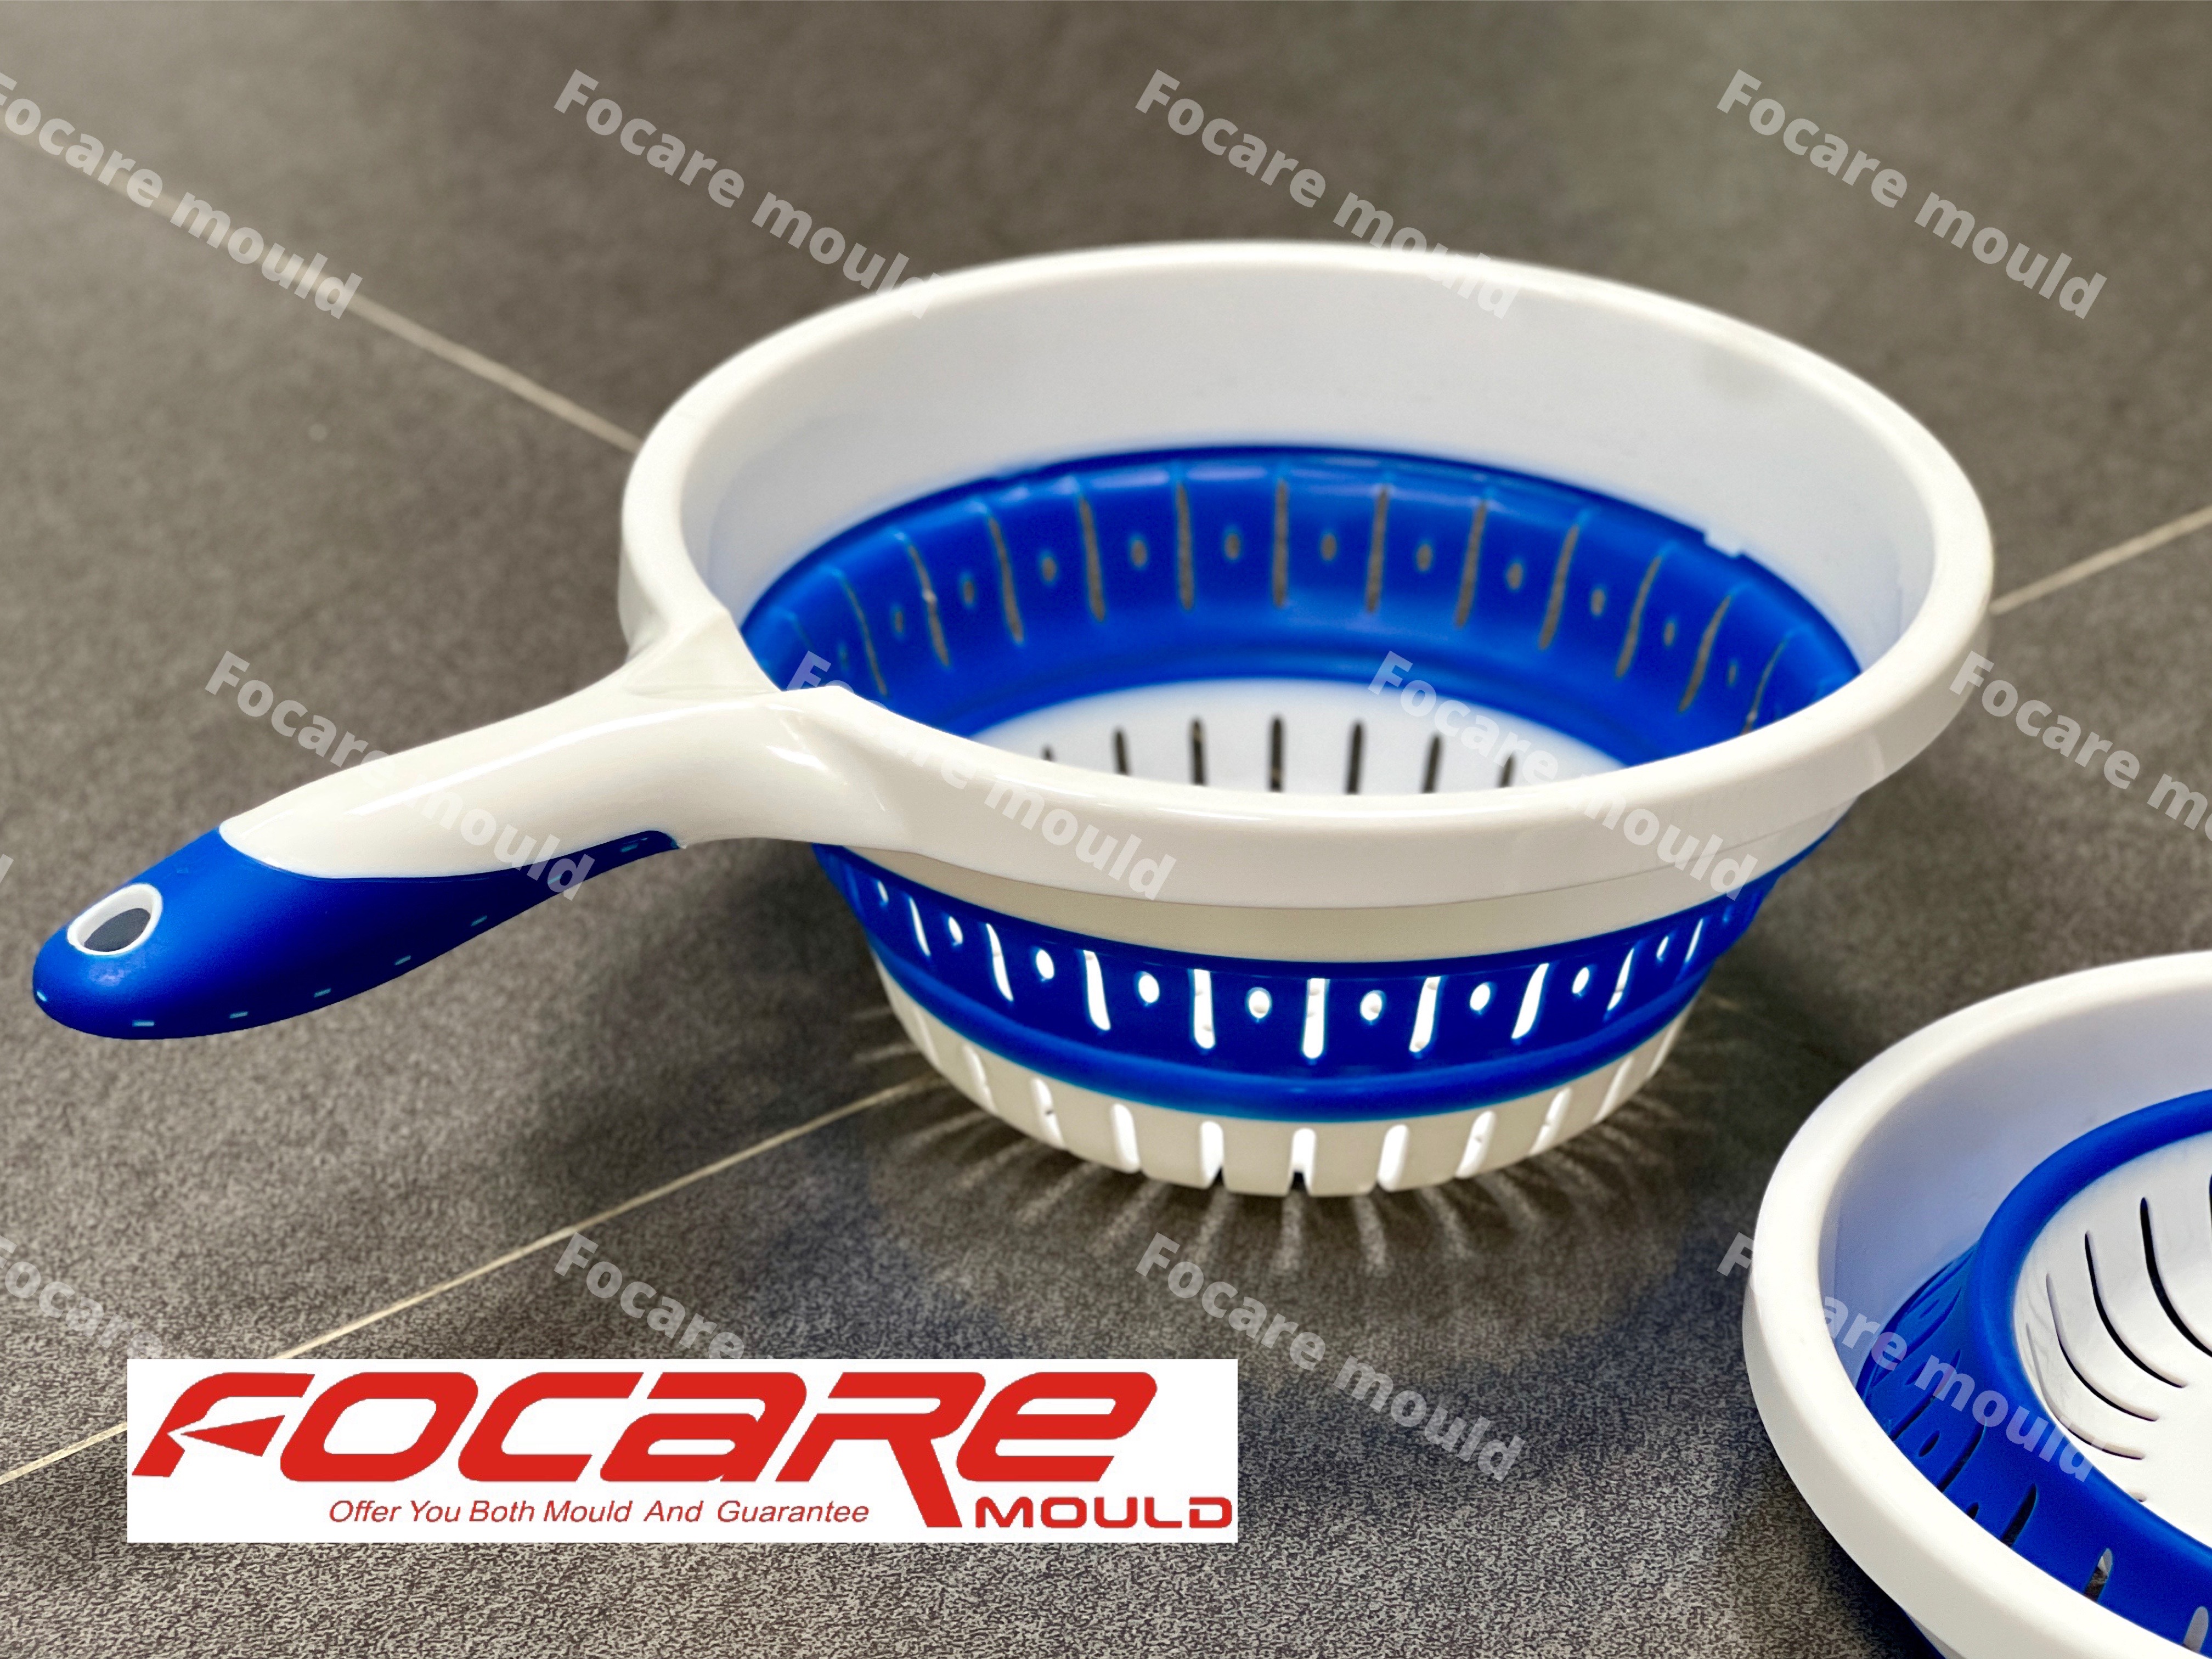 Two-color collapsible strainer with handle mold